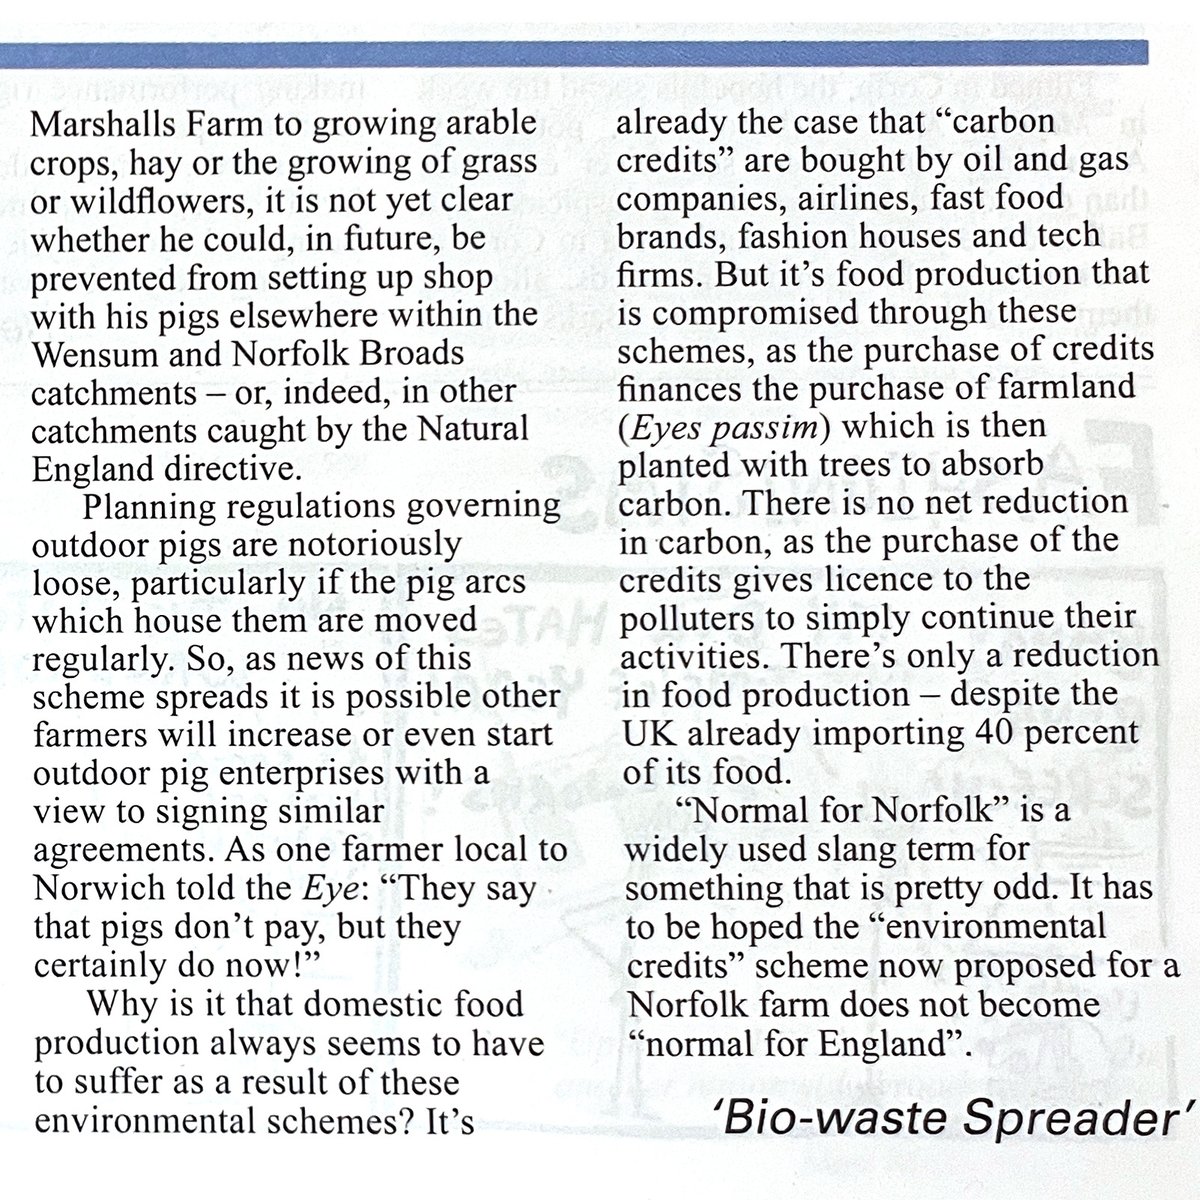 Paying polluters not to pollute in advance is a scary precedent which can only get out of hand and end badly for us all. @georgemonbiot @milesking10 @landworkersUK @UKSustain @orfc @realfarming @guyshrubsole #foodsovereignty #climatechange #environment #farming #subsidies